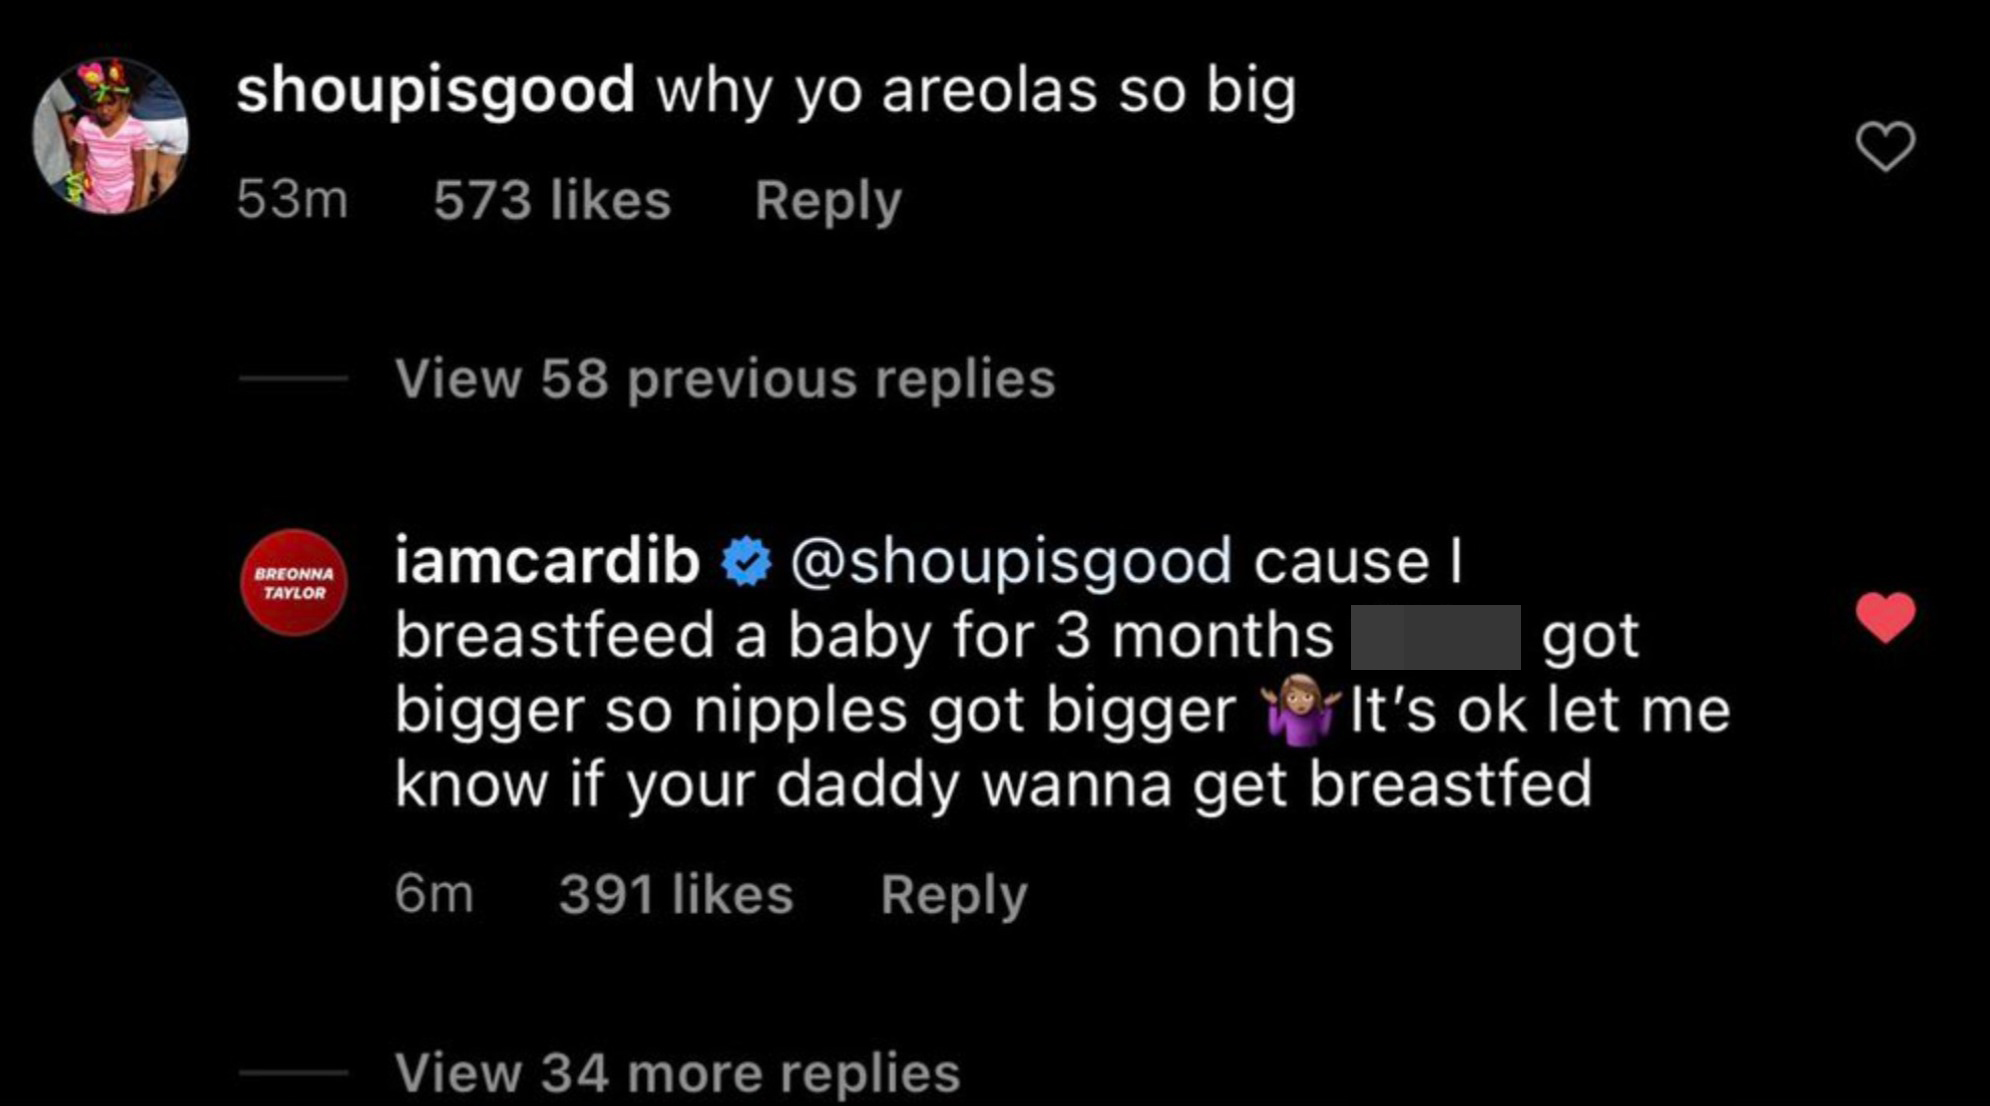 aaron frey recommends are big areolas bad pic